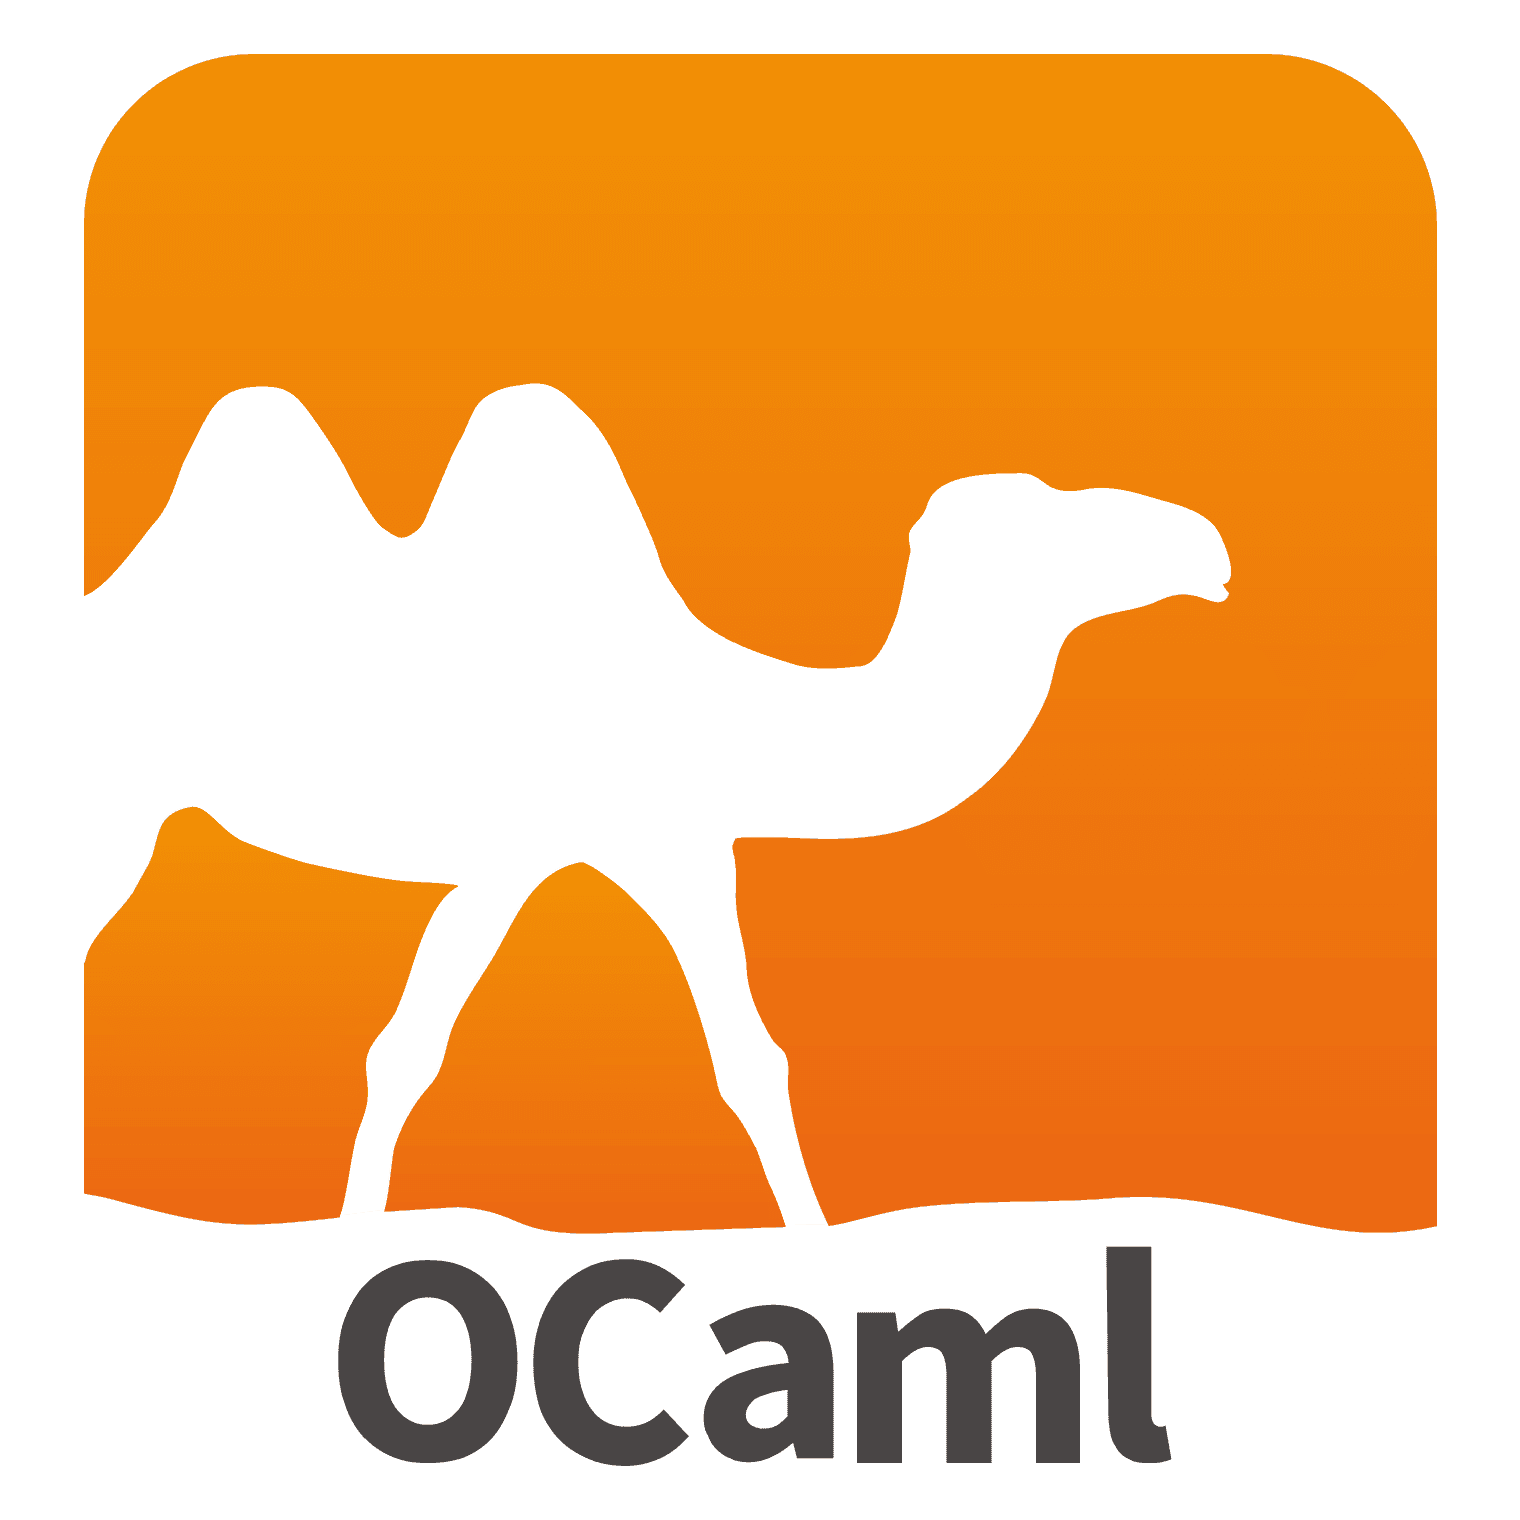 Conduct Awesome OCaml CodePair Interviews